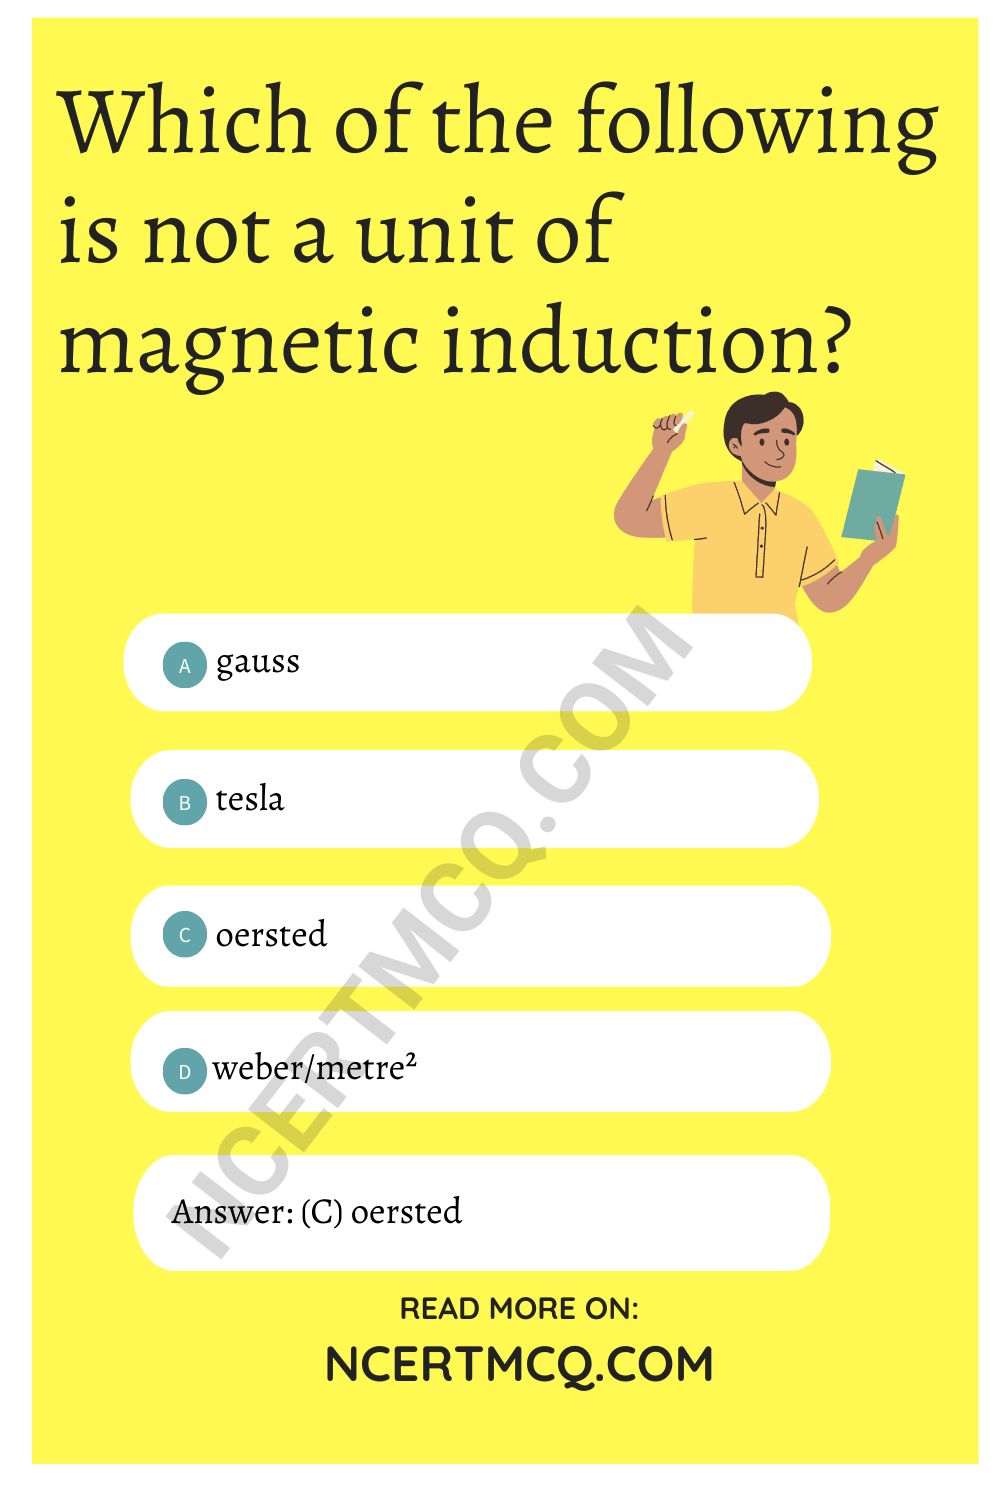 Which of the following is not a unit of magnetic induction?